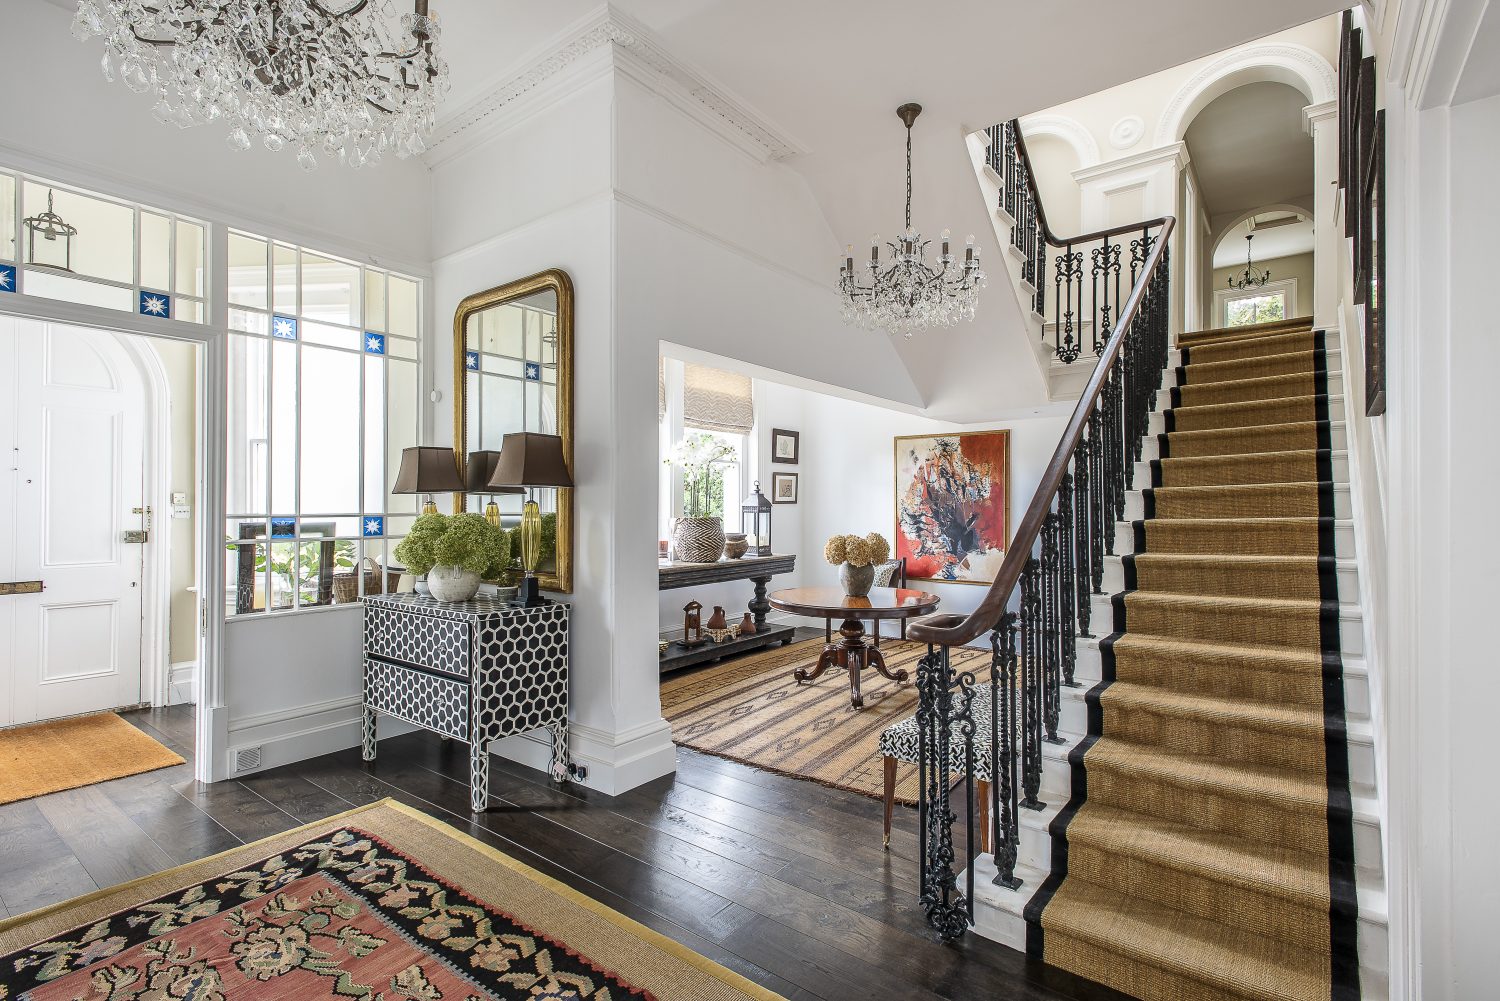 One of the most impressive spaces within the house is the double height entrance hall